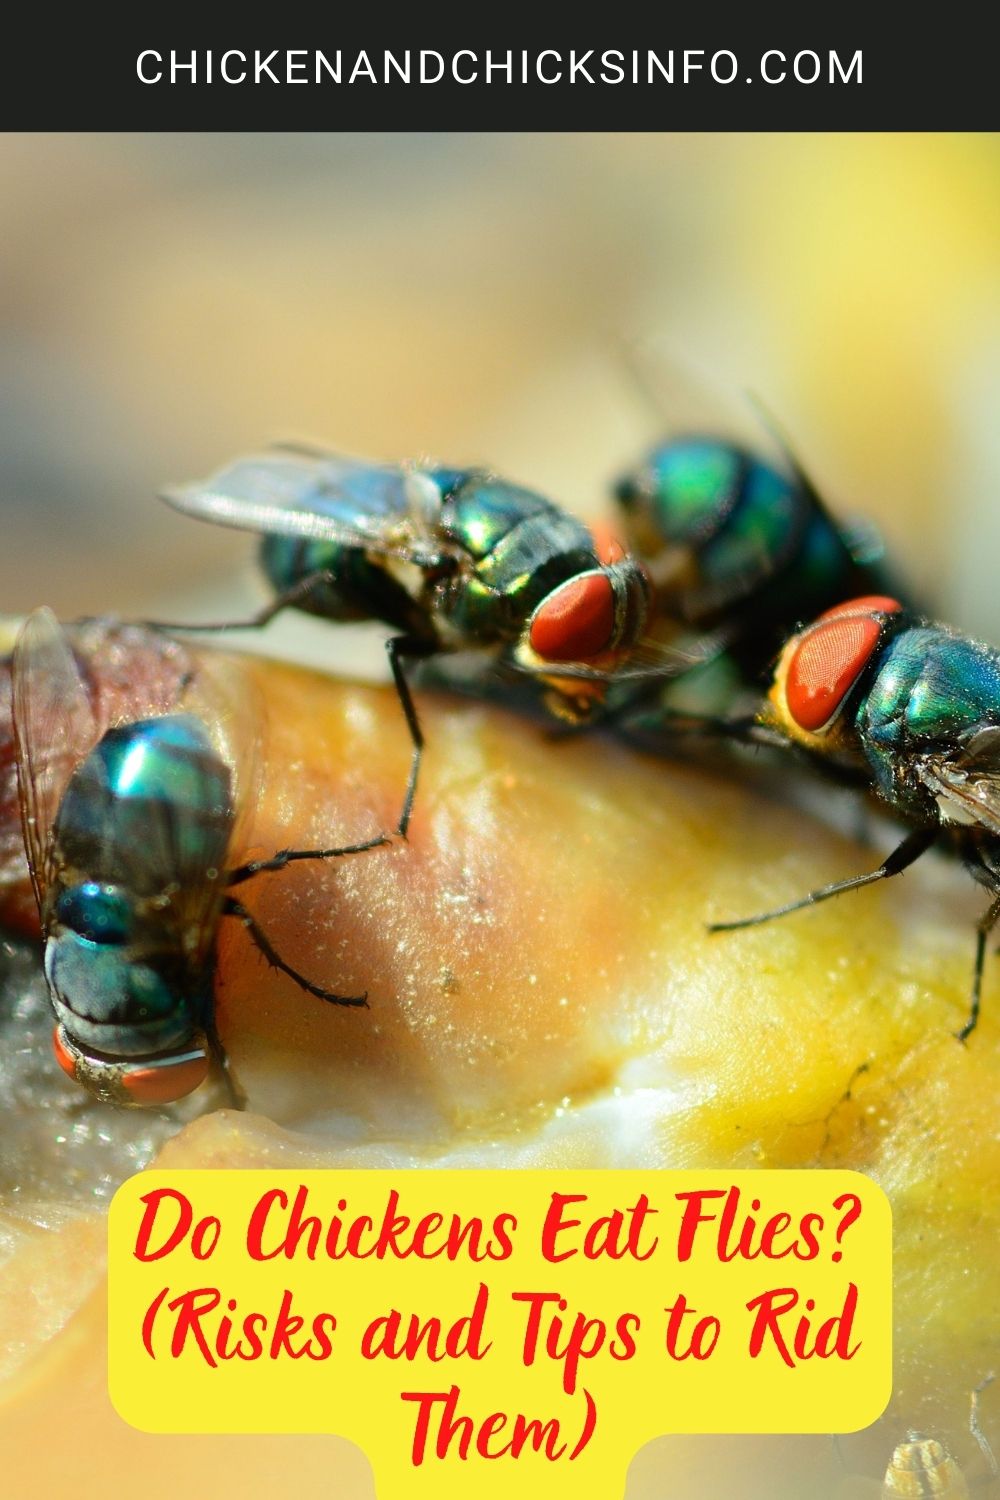 Do Chickens Eat Flies? (Risks and Tips to Rid Them) poster.
